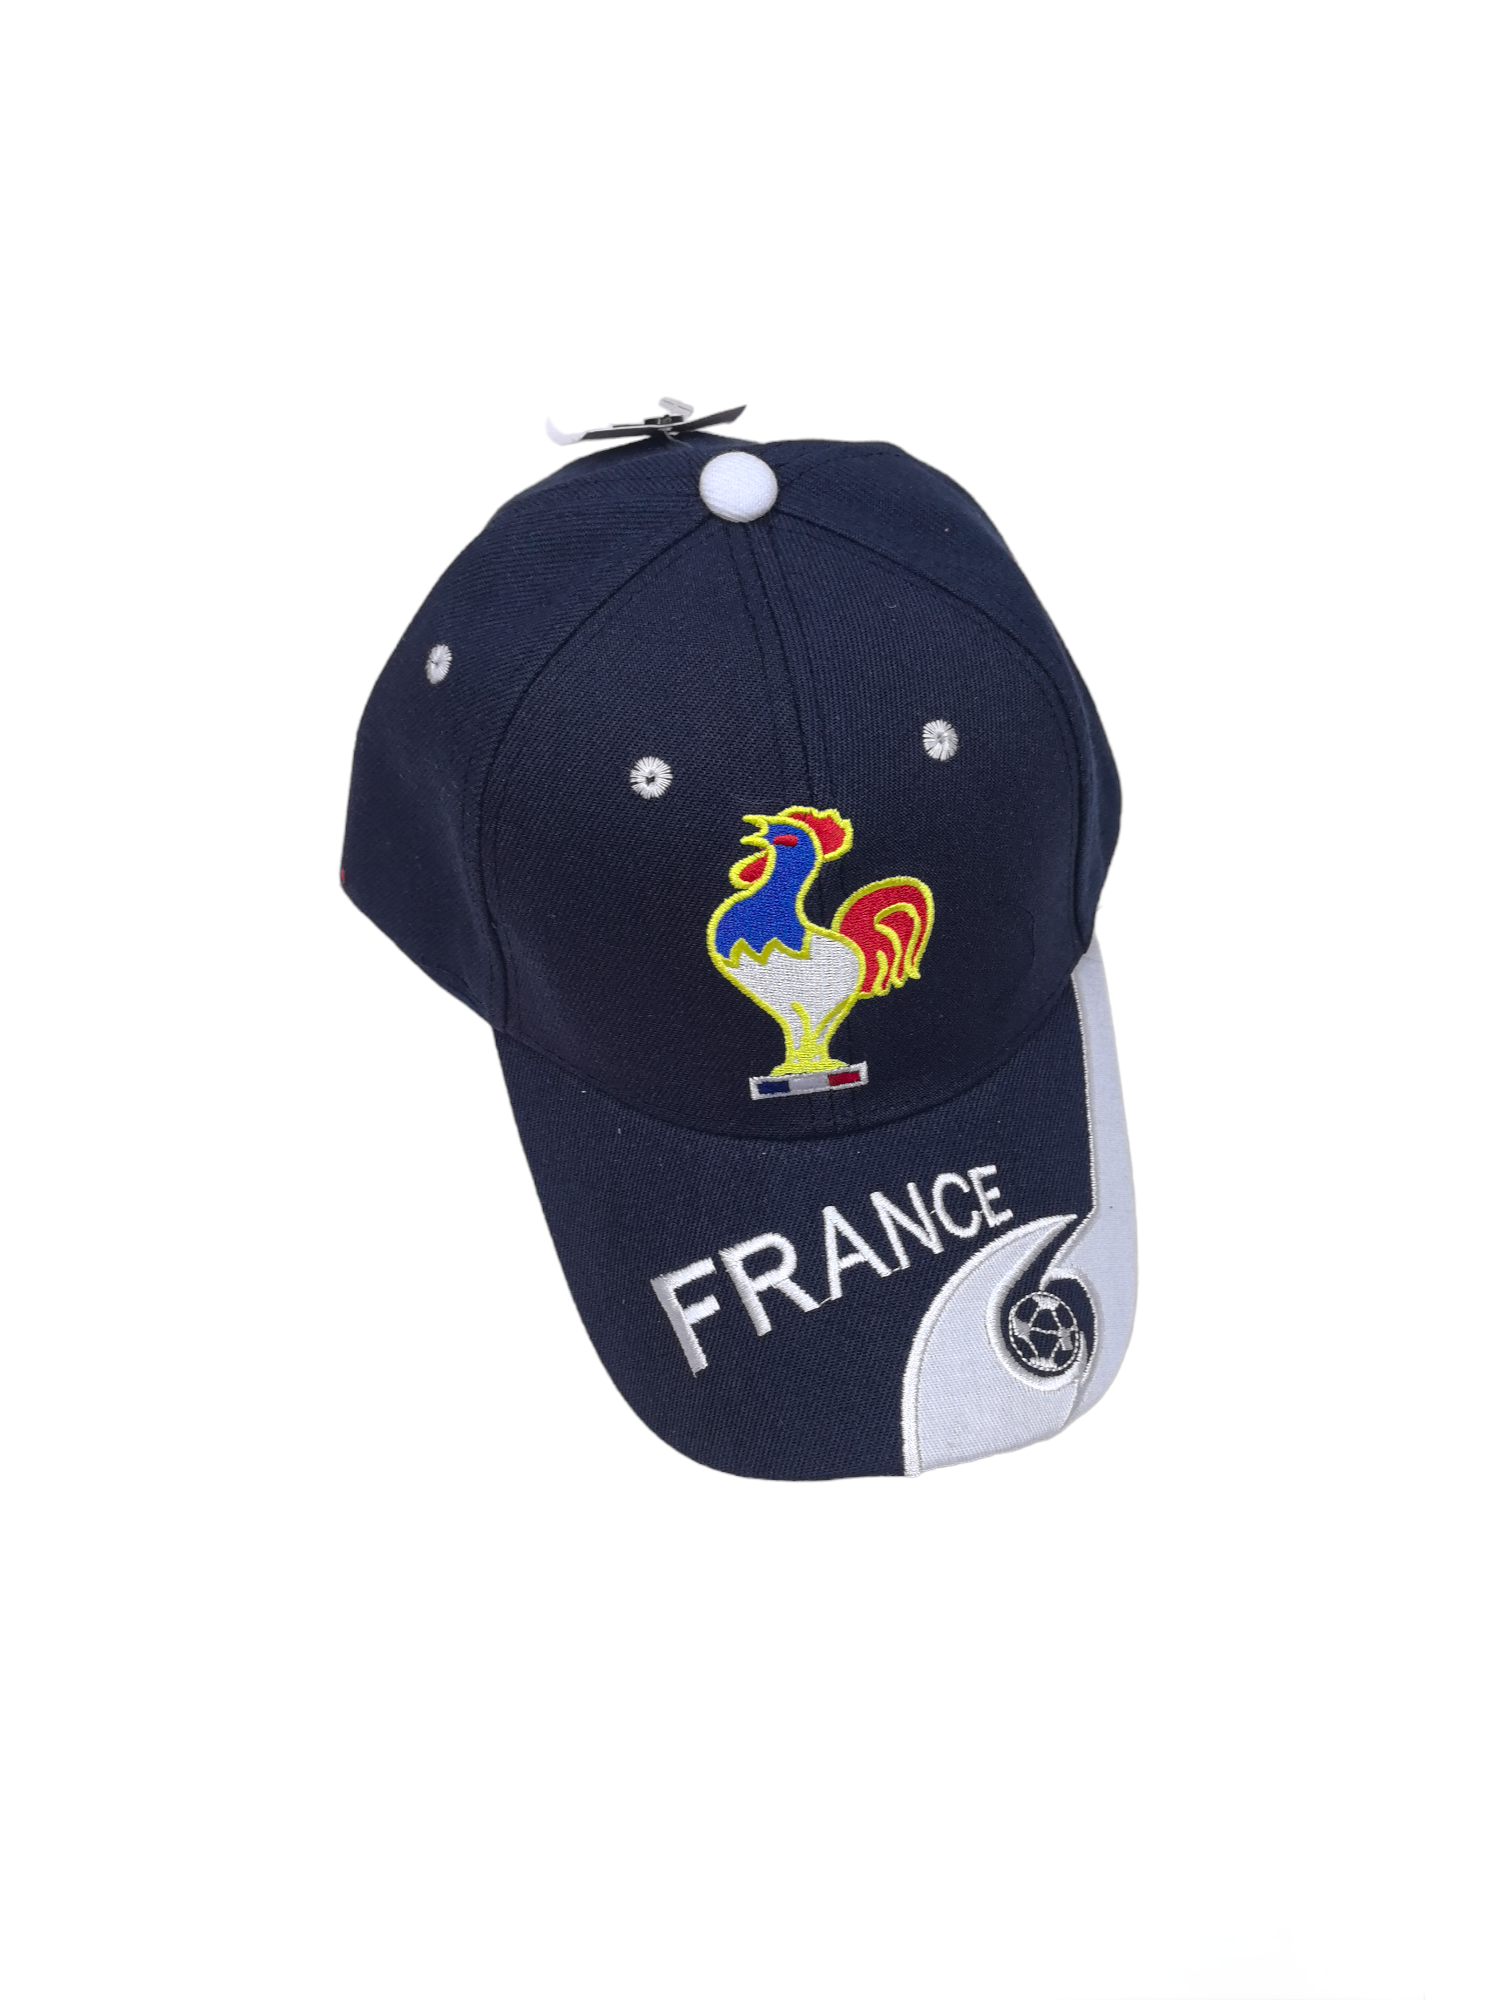 Casquettes France (x6)